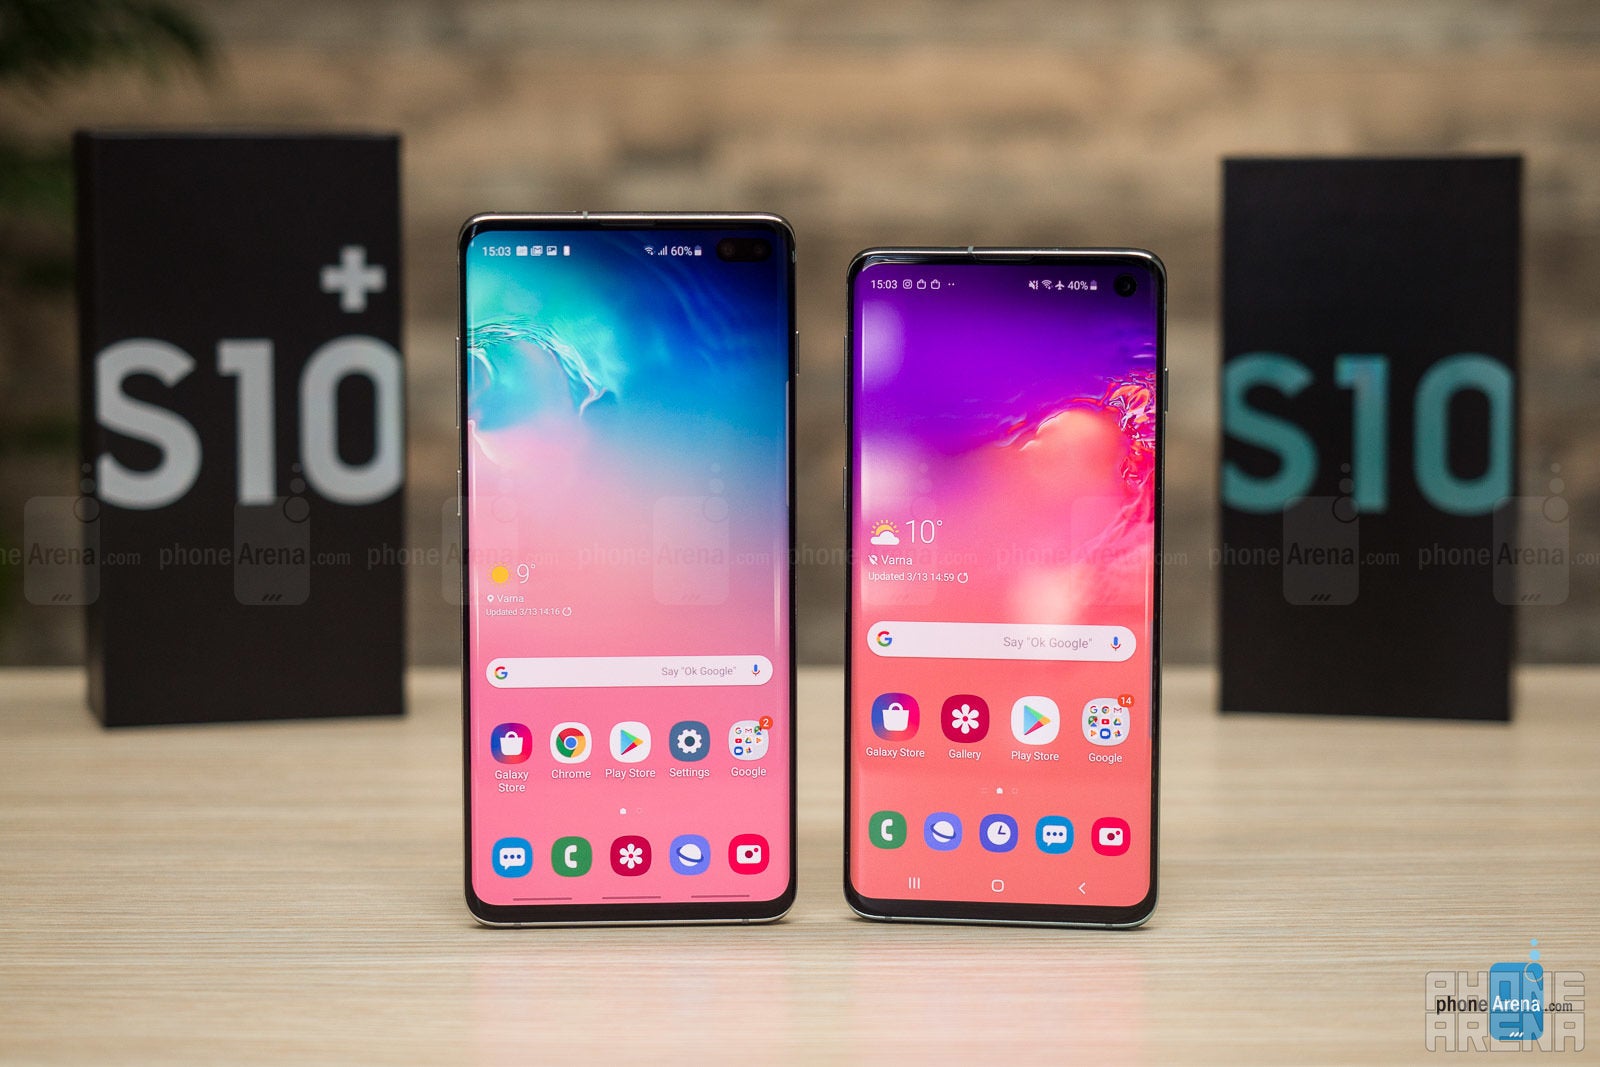 Galaxy S10 Exynos vs S10 Snapdragon: Which is better?